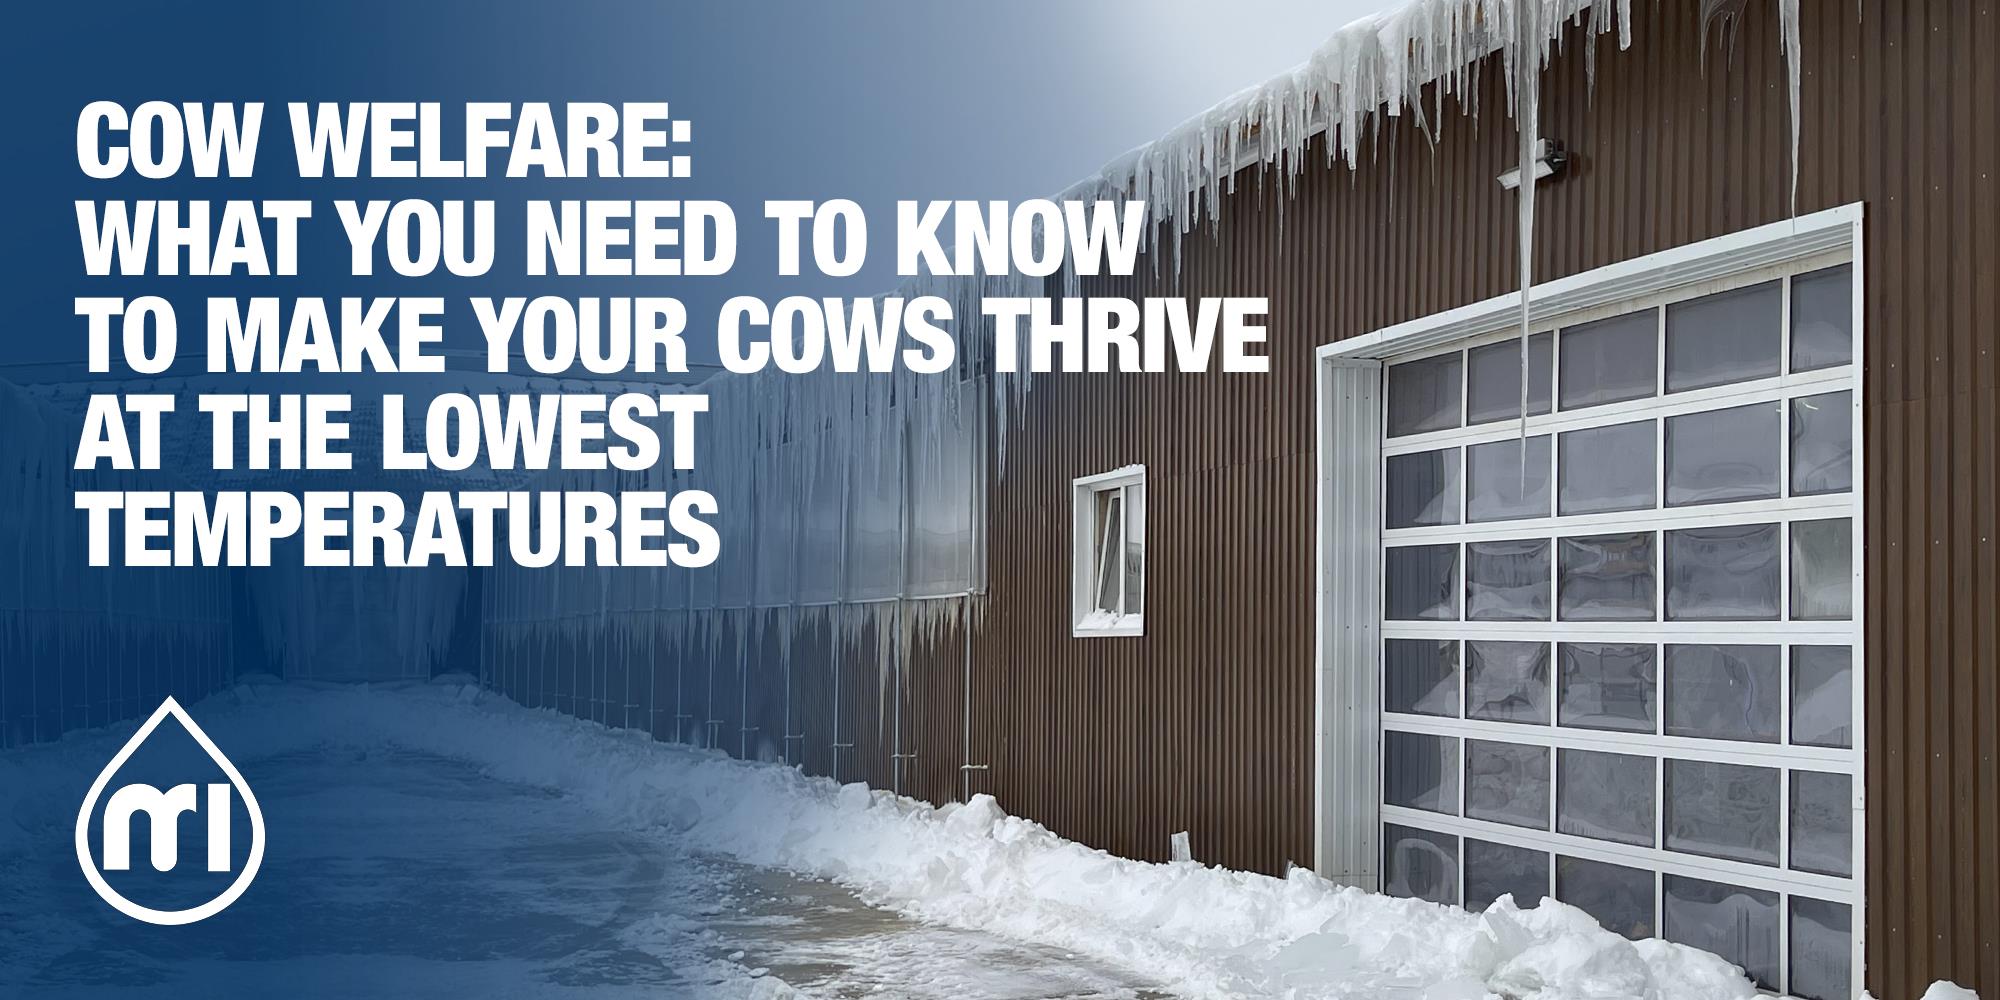 Cow welfare at lowest temperatures